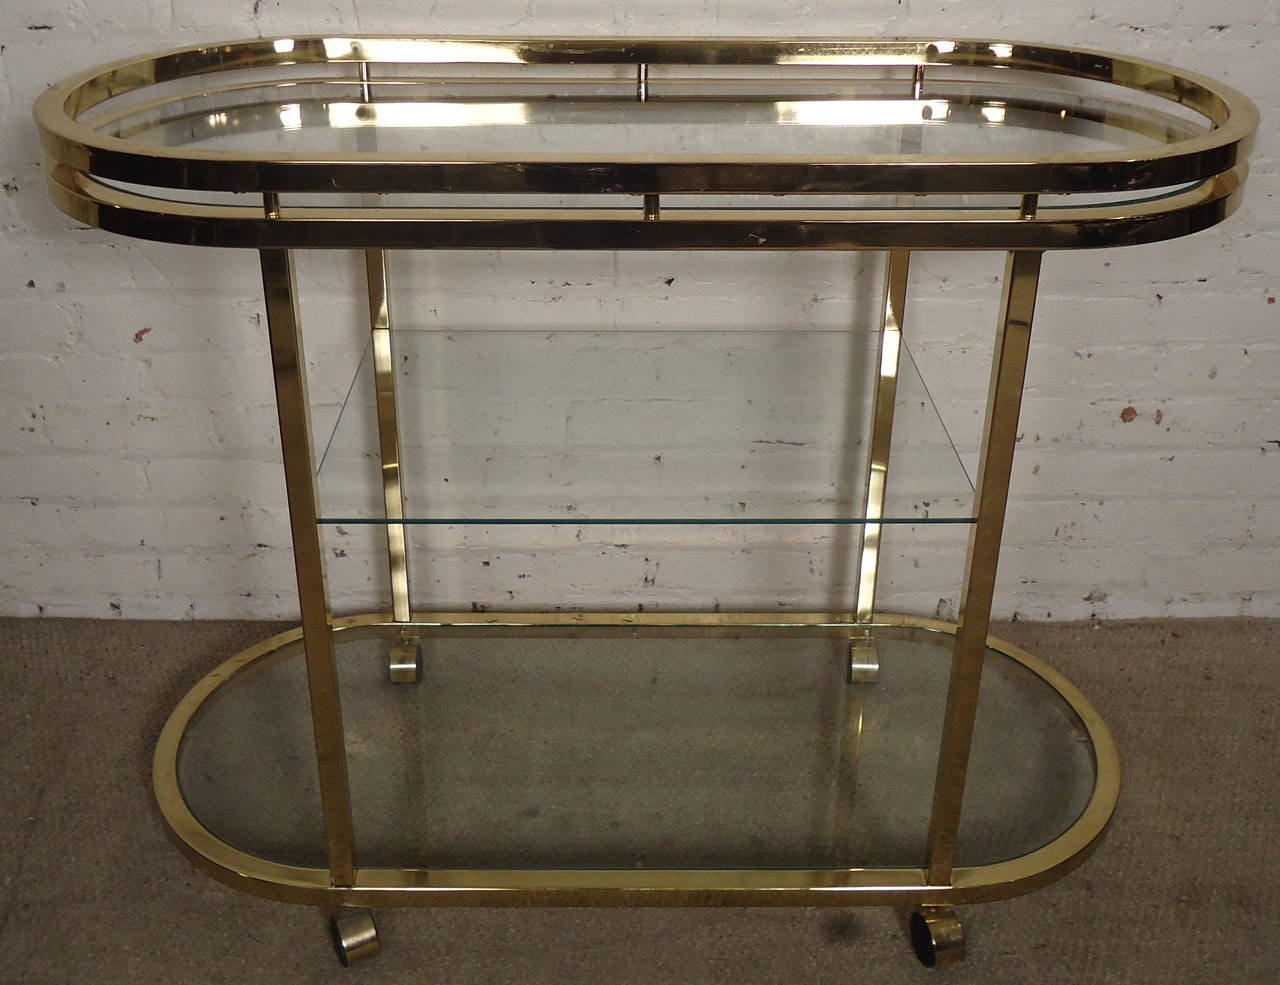 Unique solidly built vintage polished brass and glass bar cart designed by Milo Baughman for DIA, Design Institute of America. Set on rolling casters with two oval shelves and a middle glass shelf. Handsome mobile cart for bar ware.

(Please